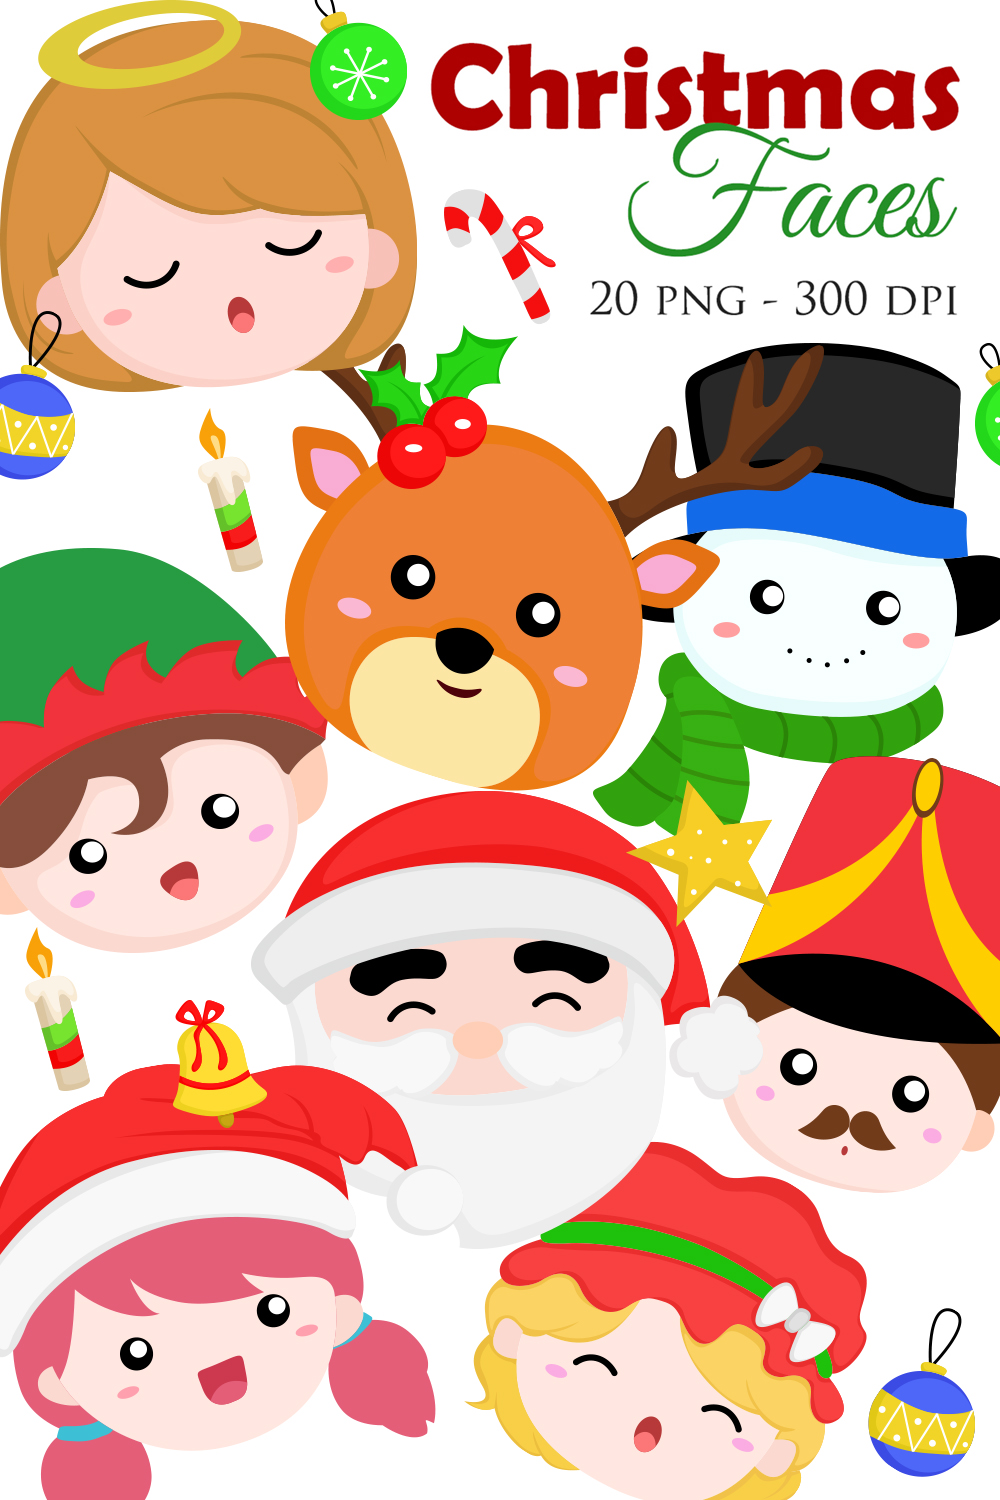 Cute Colorful Christmas Faces Elf Snowman Deer Animal Girl Kids Angel Cartoon Decoration Background Illustration Vector Clipart pinterest preview image.